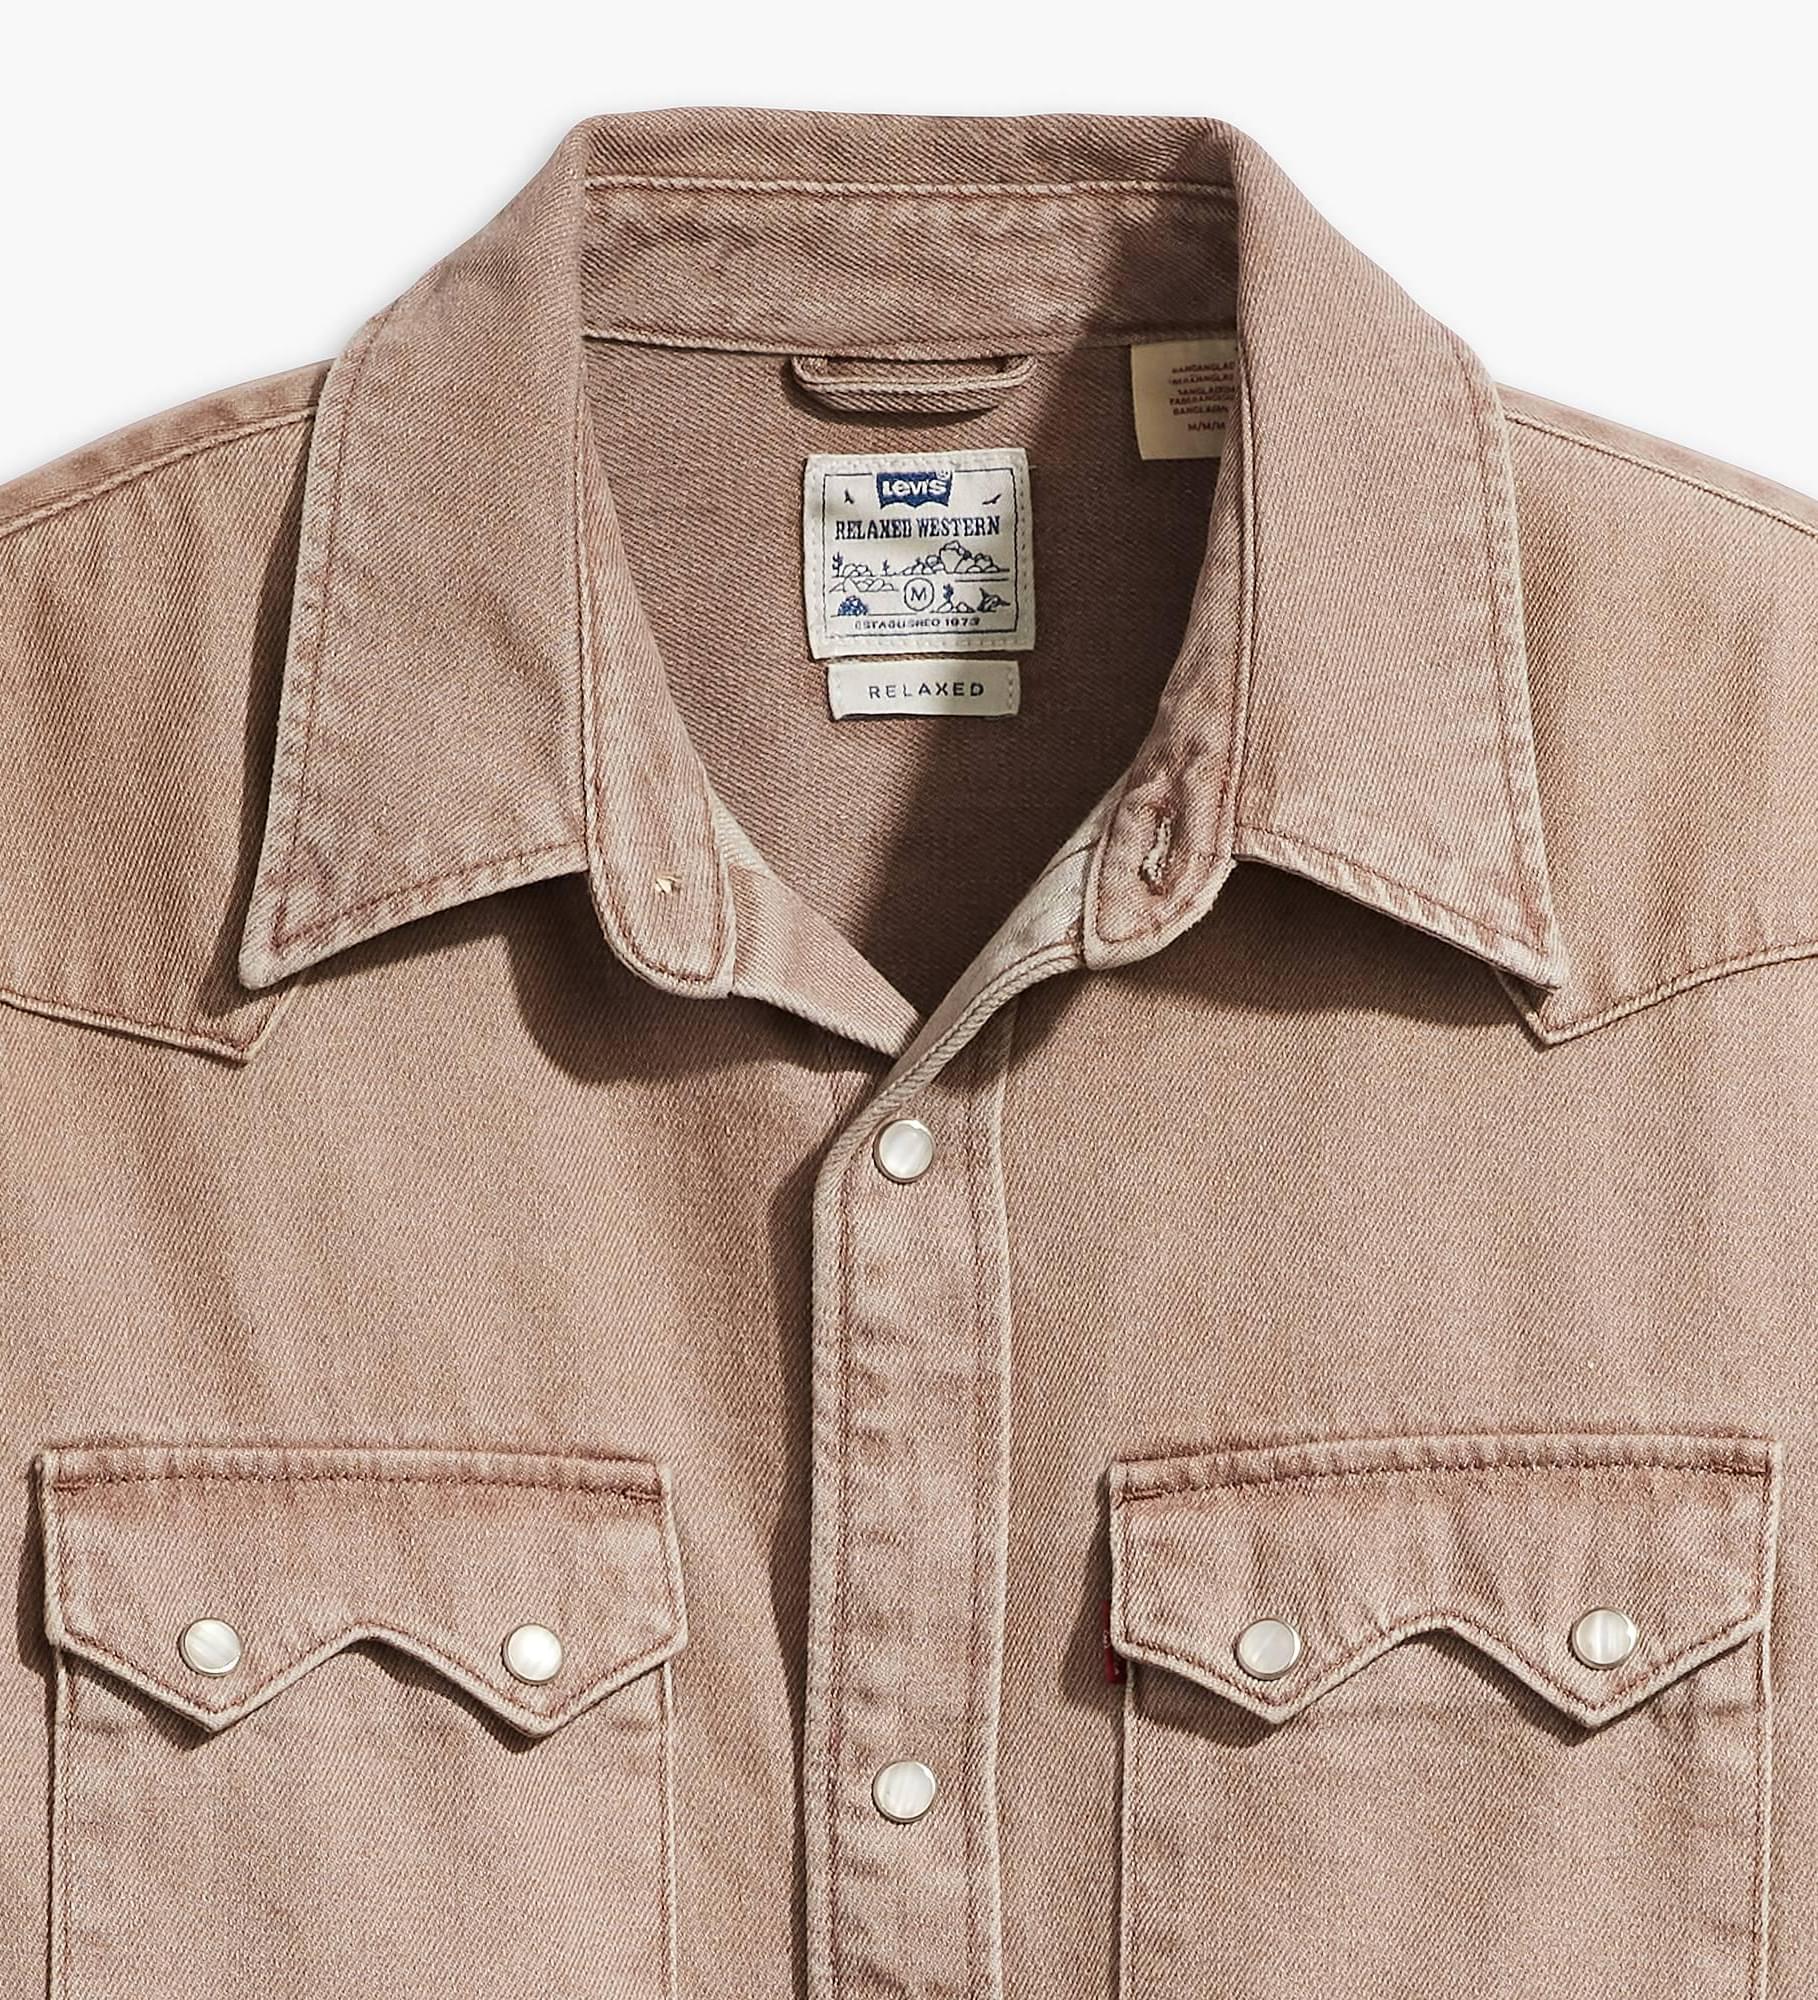 Sawtooth Relaxed Fit Western Shirt - Levi's Jeans, Jackets & Clothing